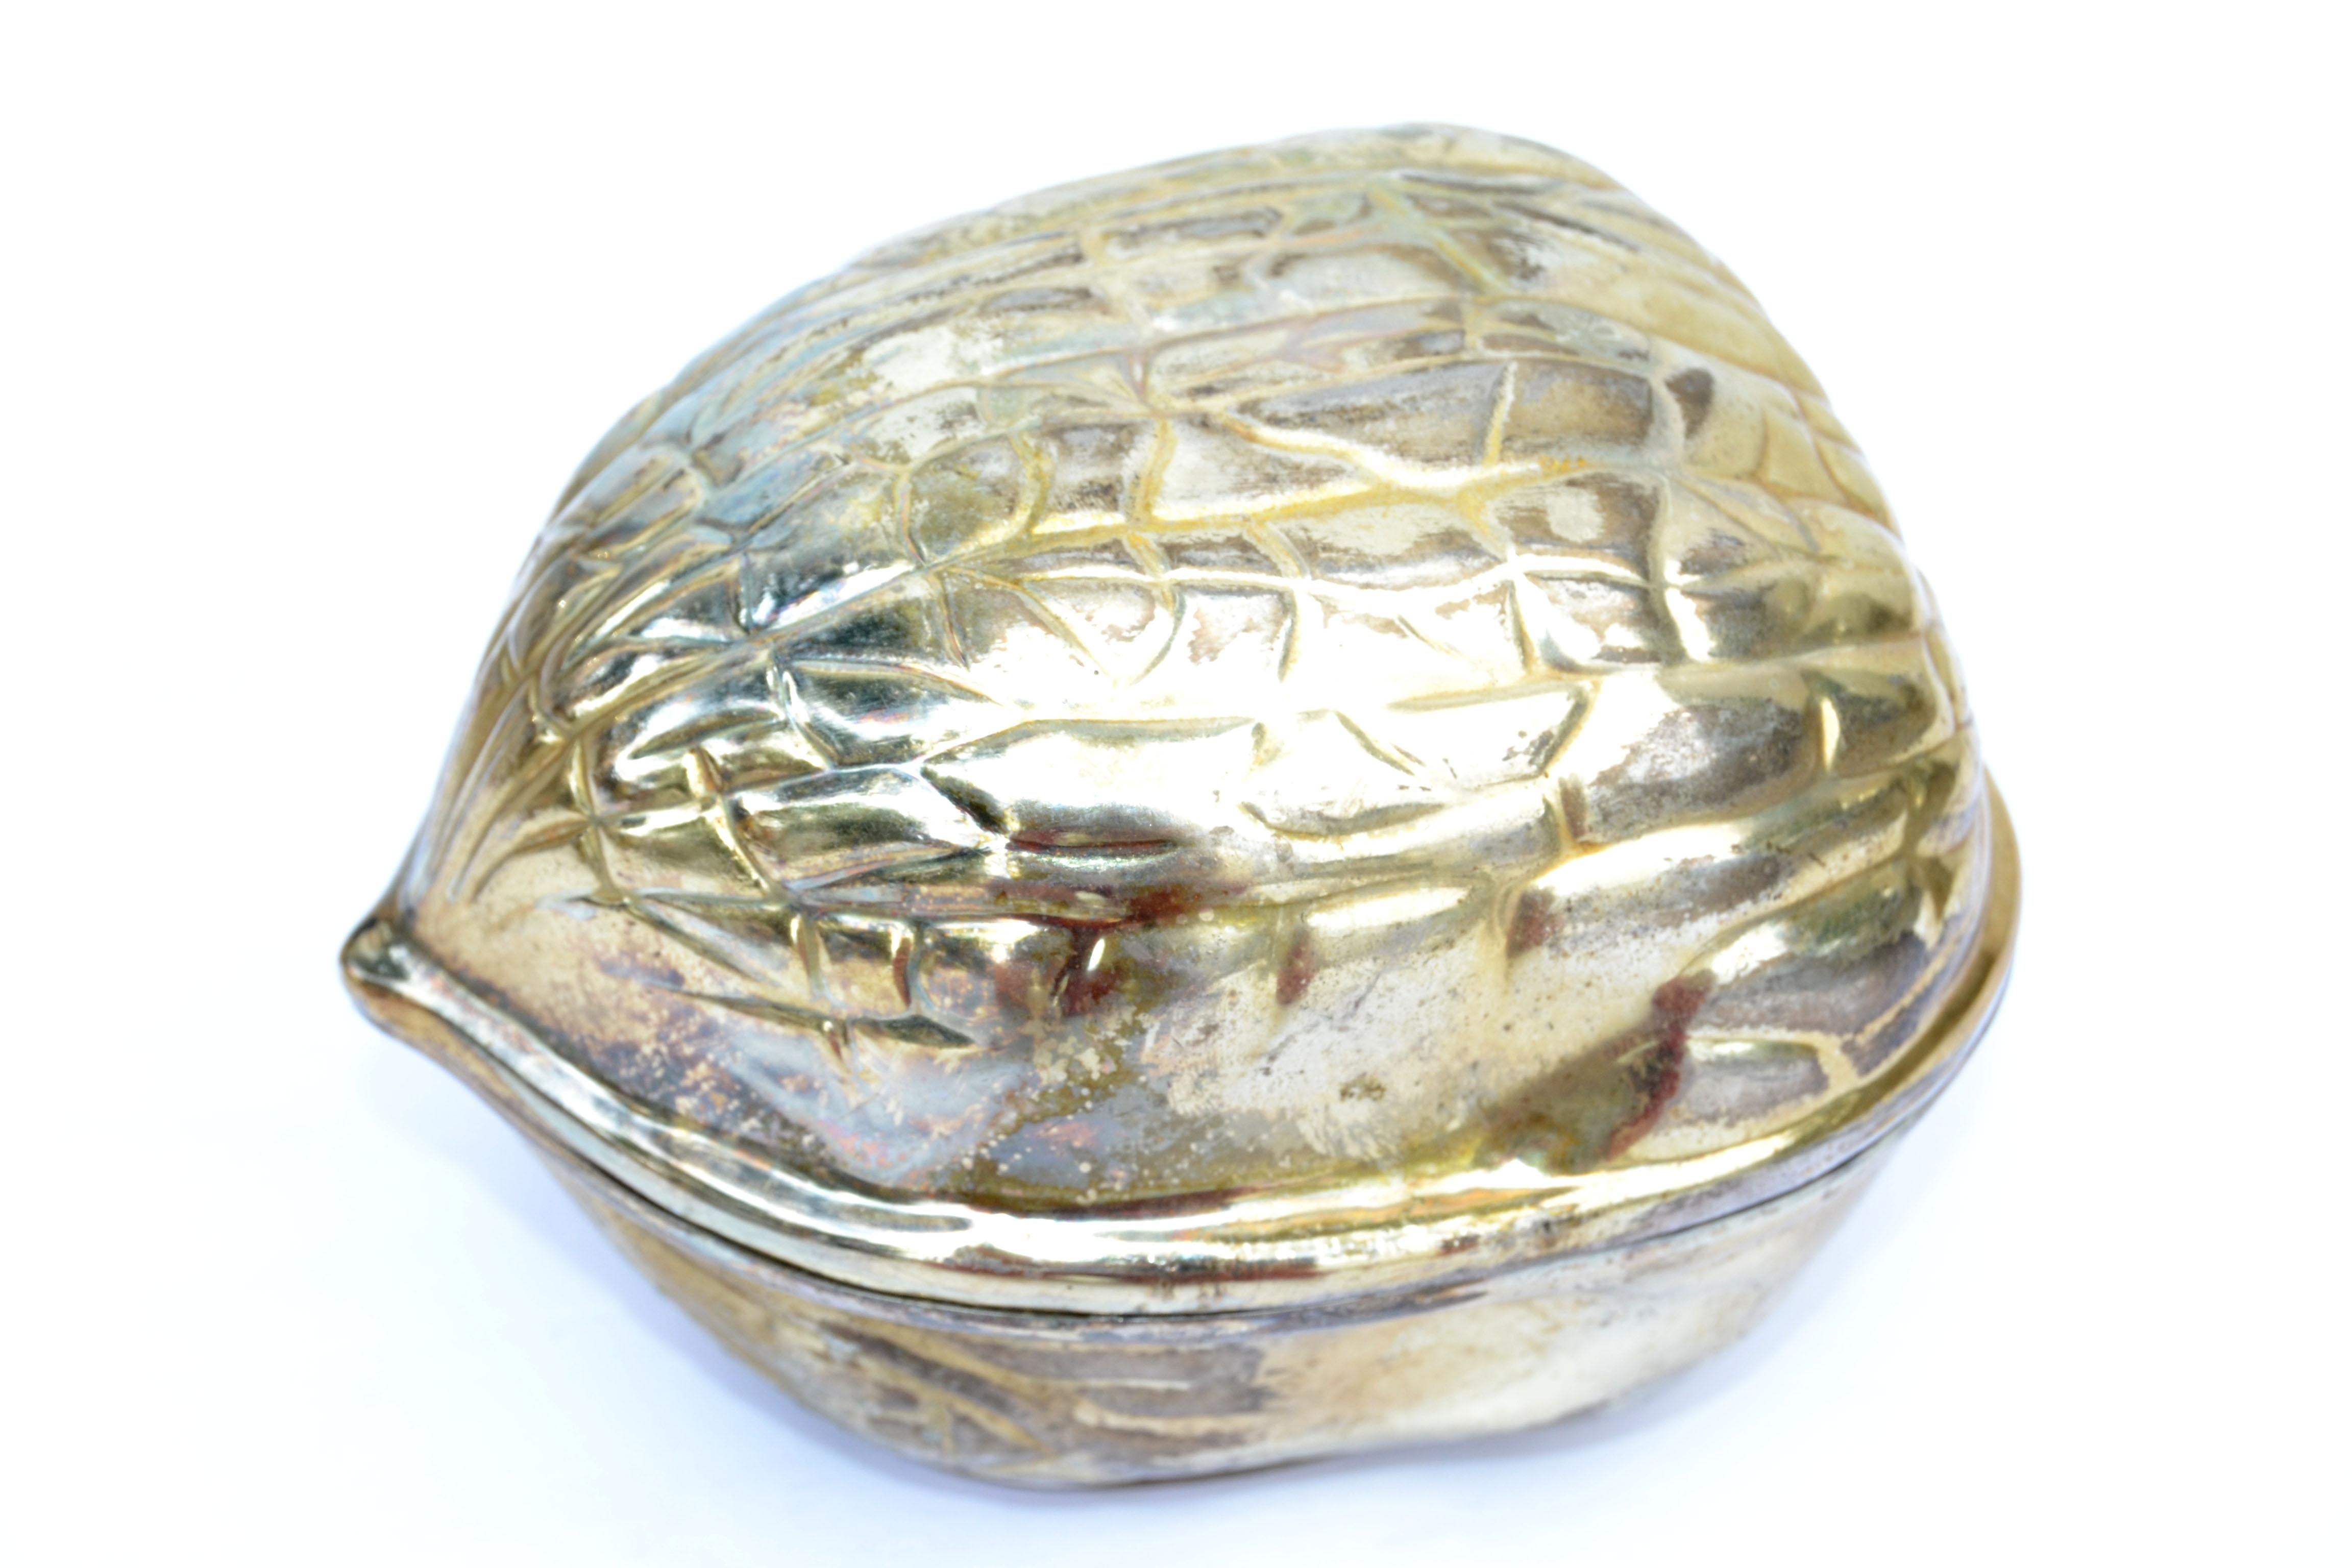 Vintage walnut box, trinket box, keepsake made in the USA by F.B. Rogers Silver Company, circa 1970.
Made out of gold plate metal and left intentionally in the aged patina.

